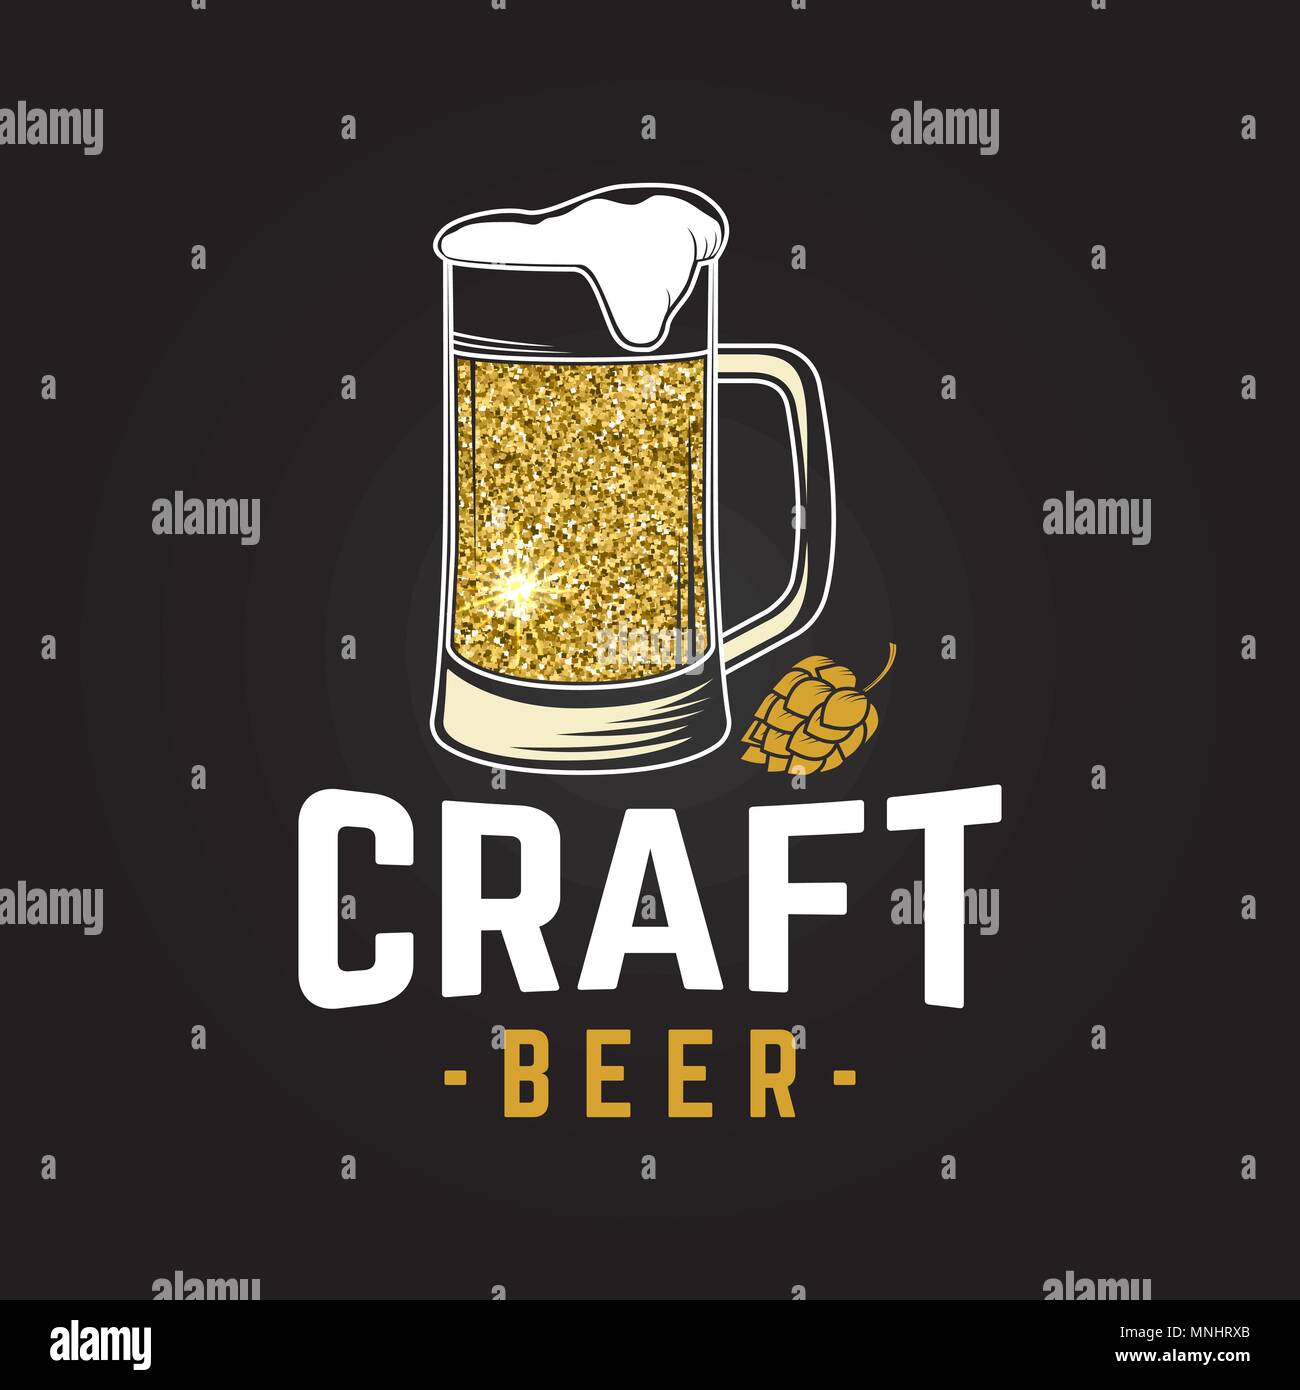 Craft Beer. Vector illustration. Vintage design for bar, pub and restaurant business. Coaster for beer. Concept for shirt, print, seal, overlay or sta Stock Vector